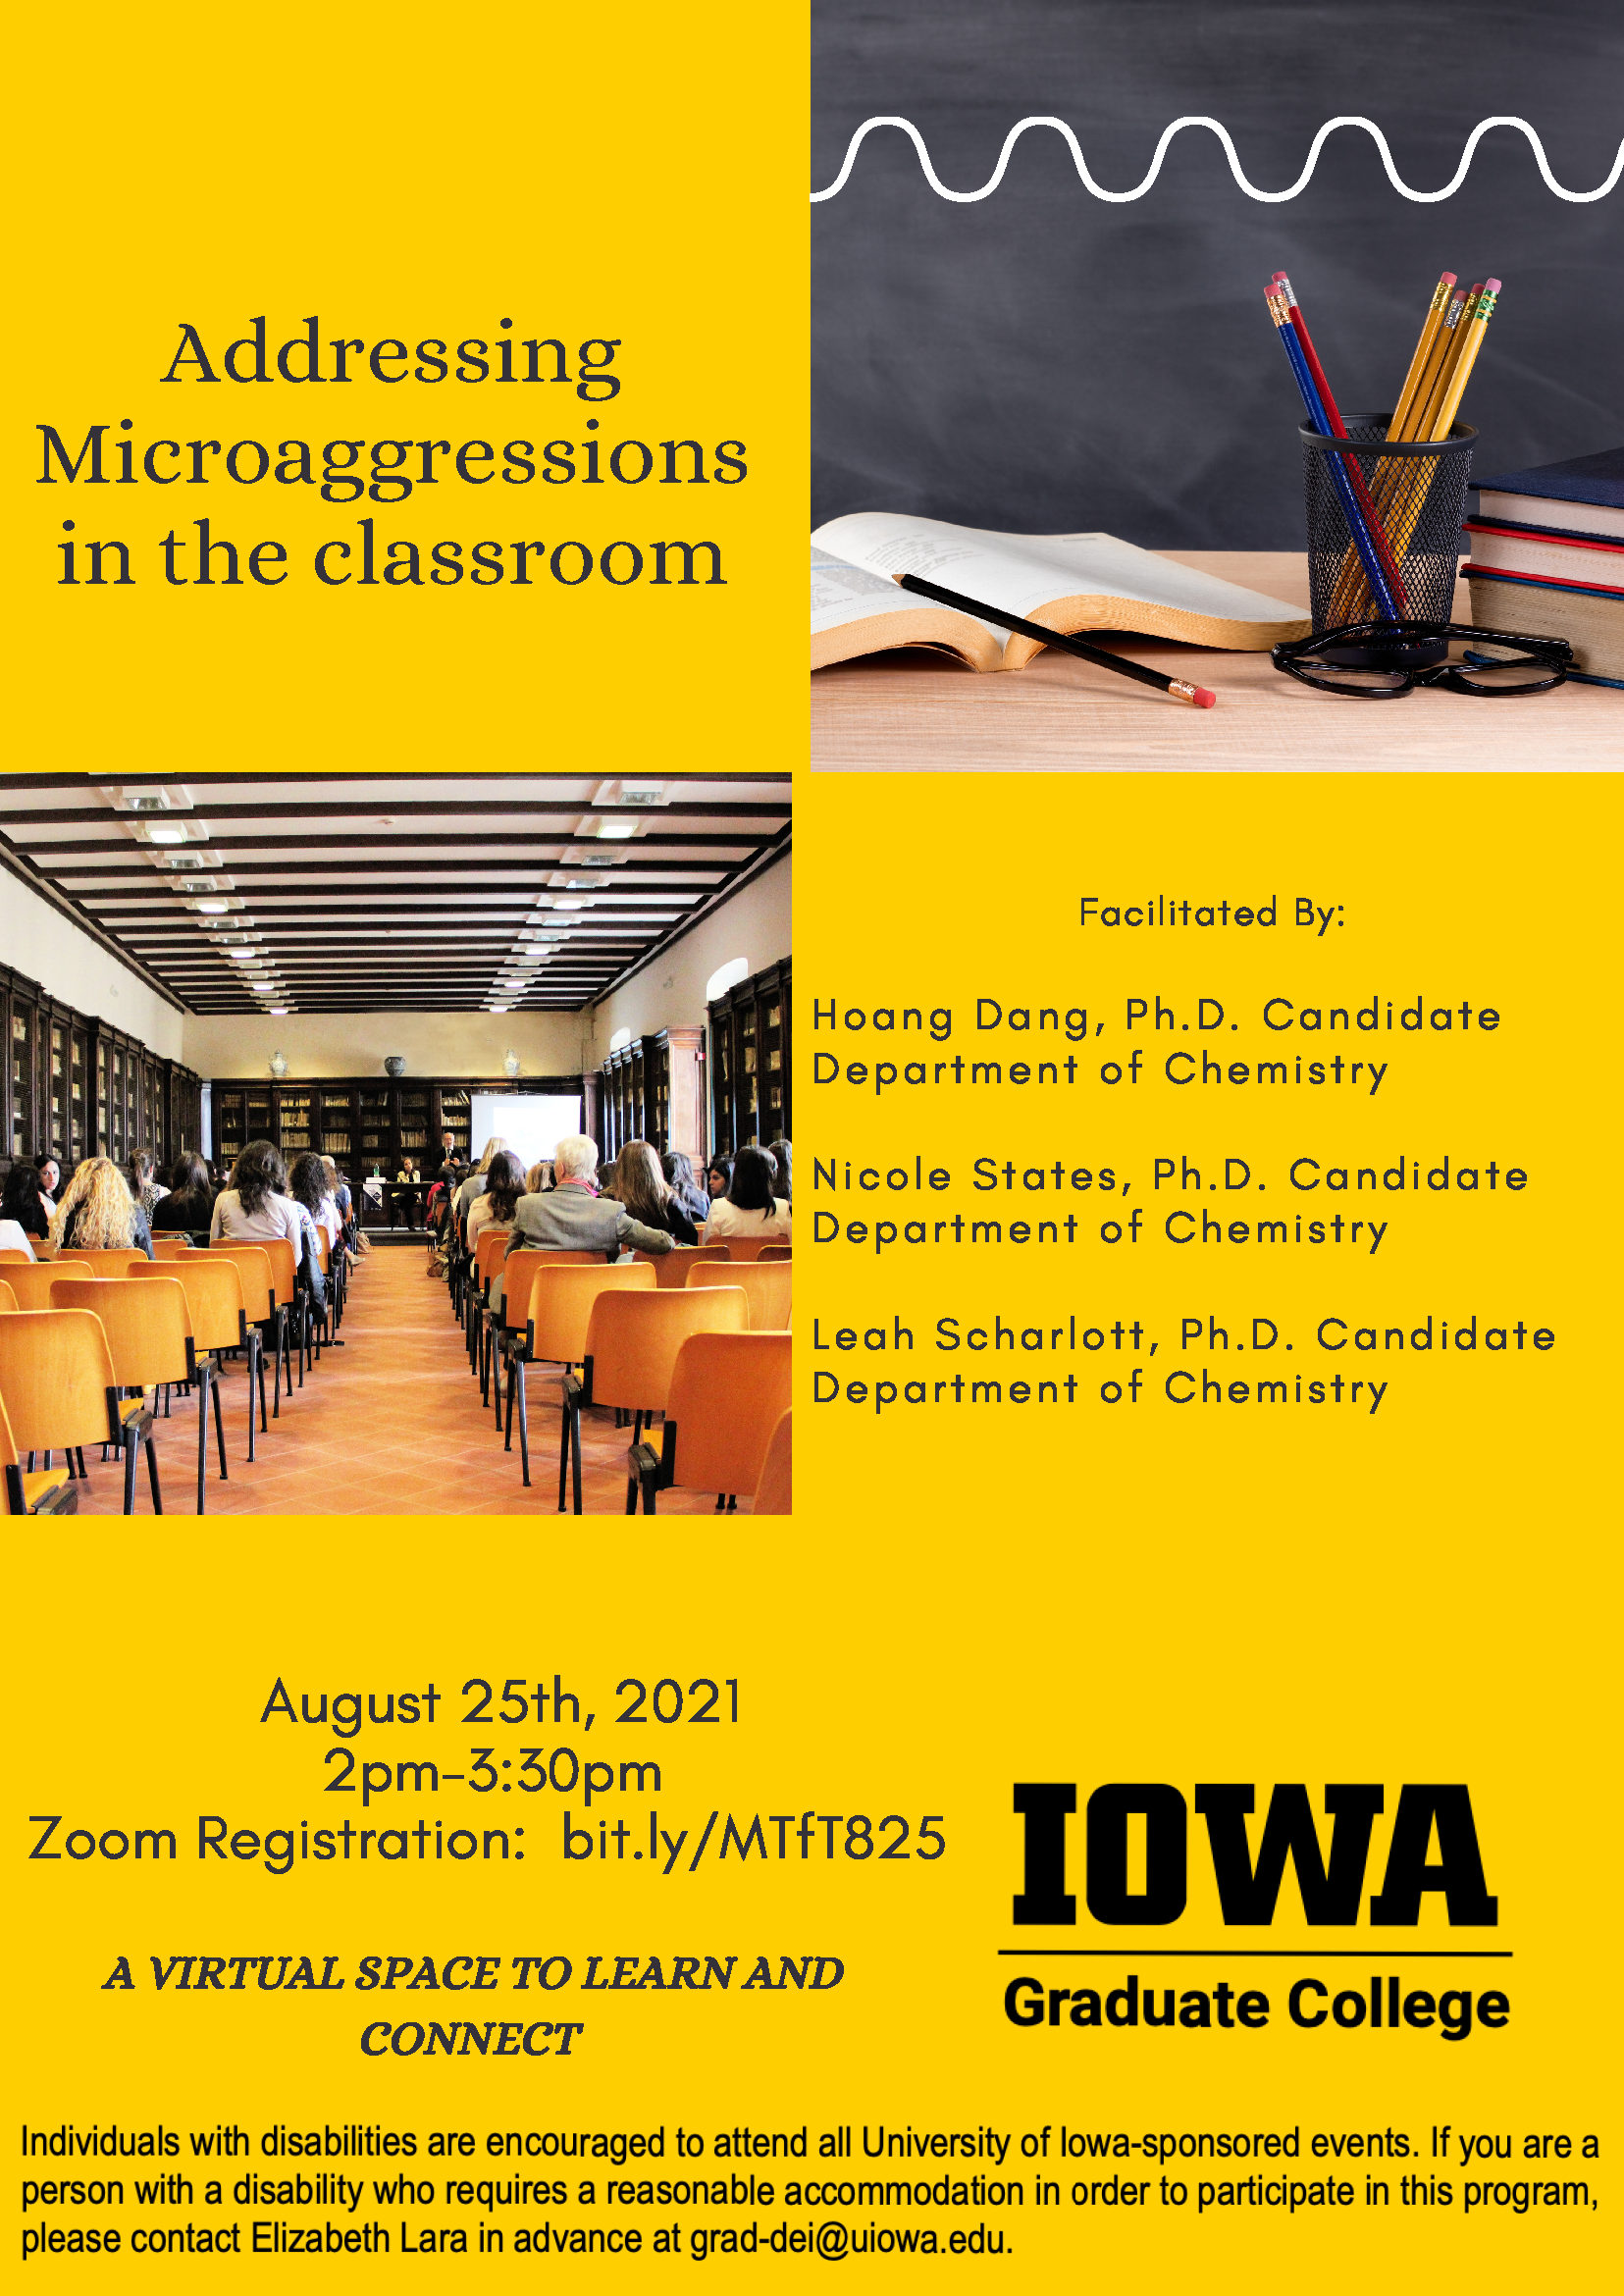 Addressing Microaggressionsin the Classroom promotional image